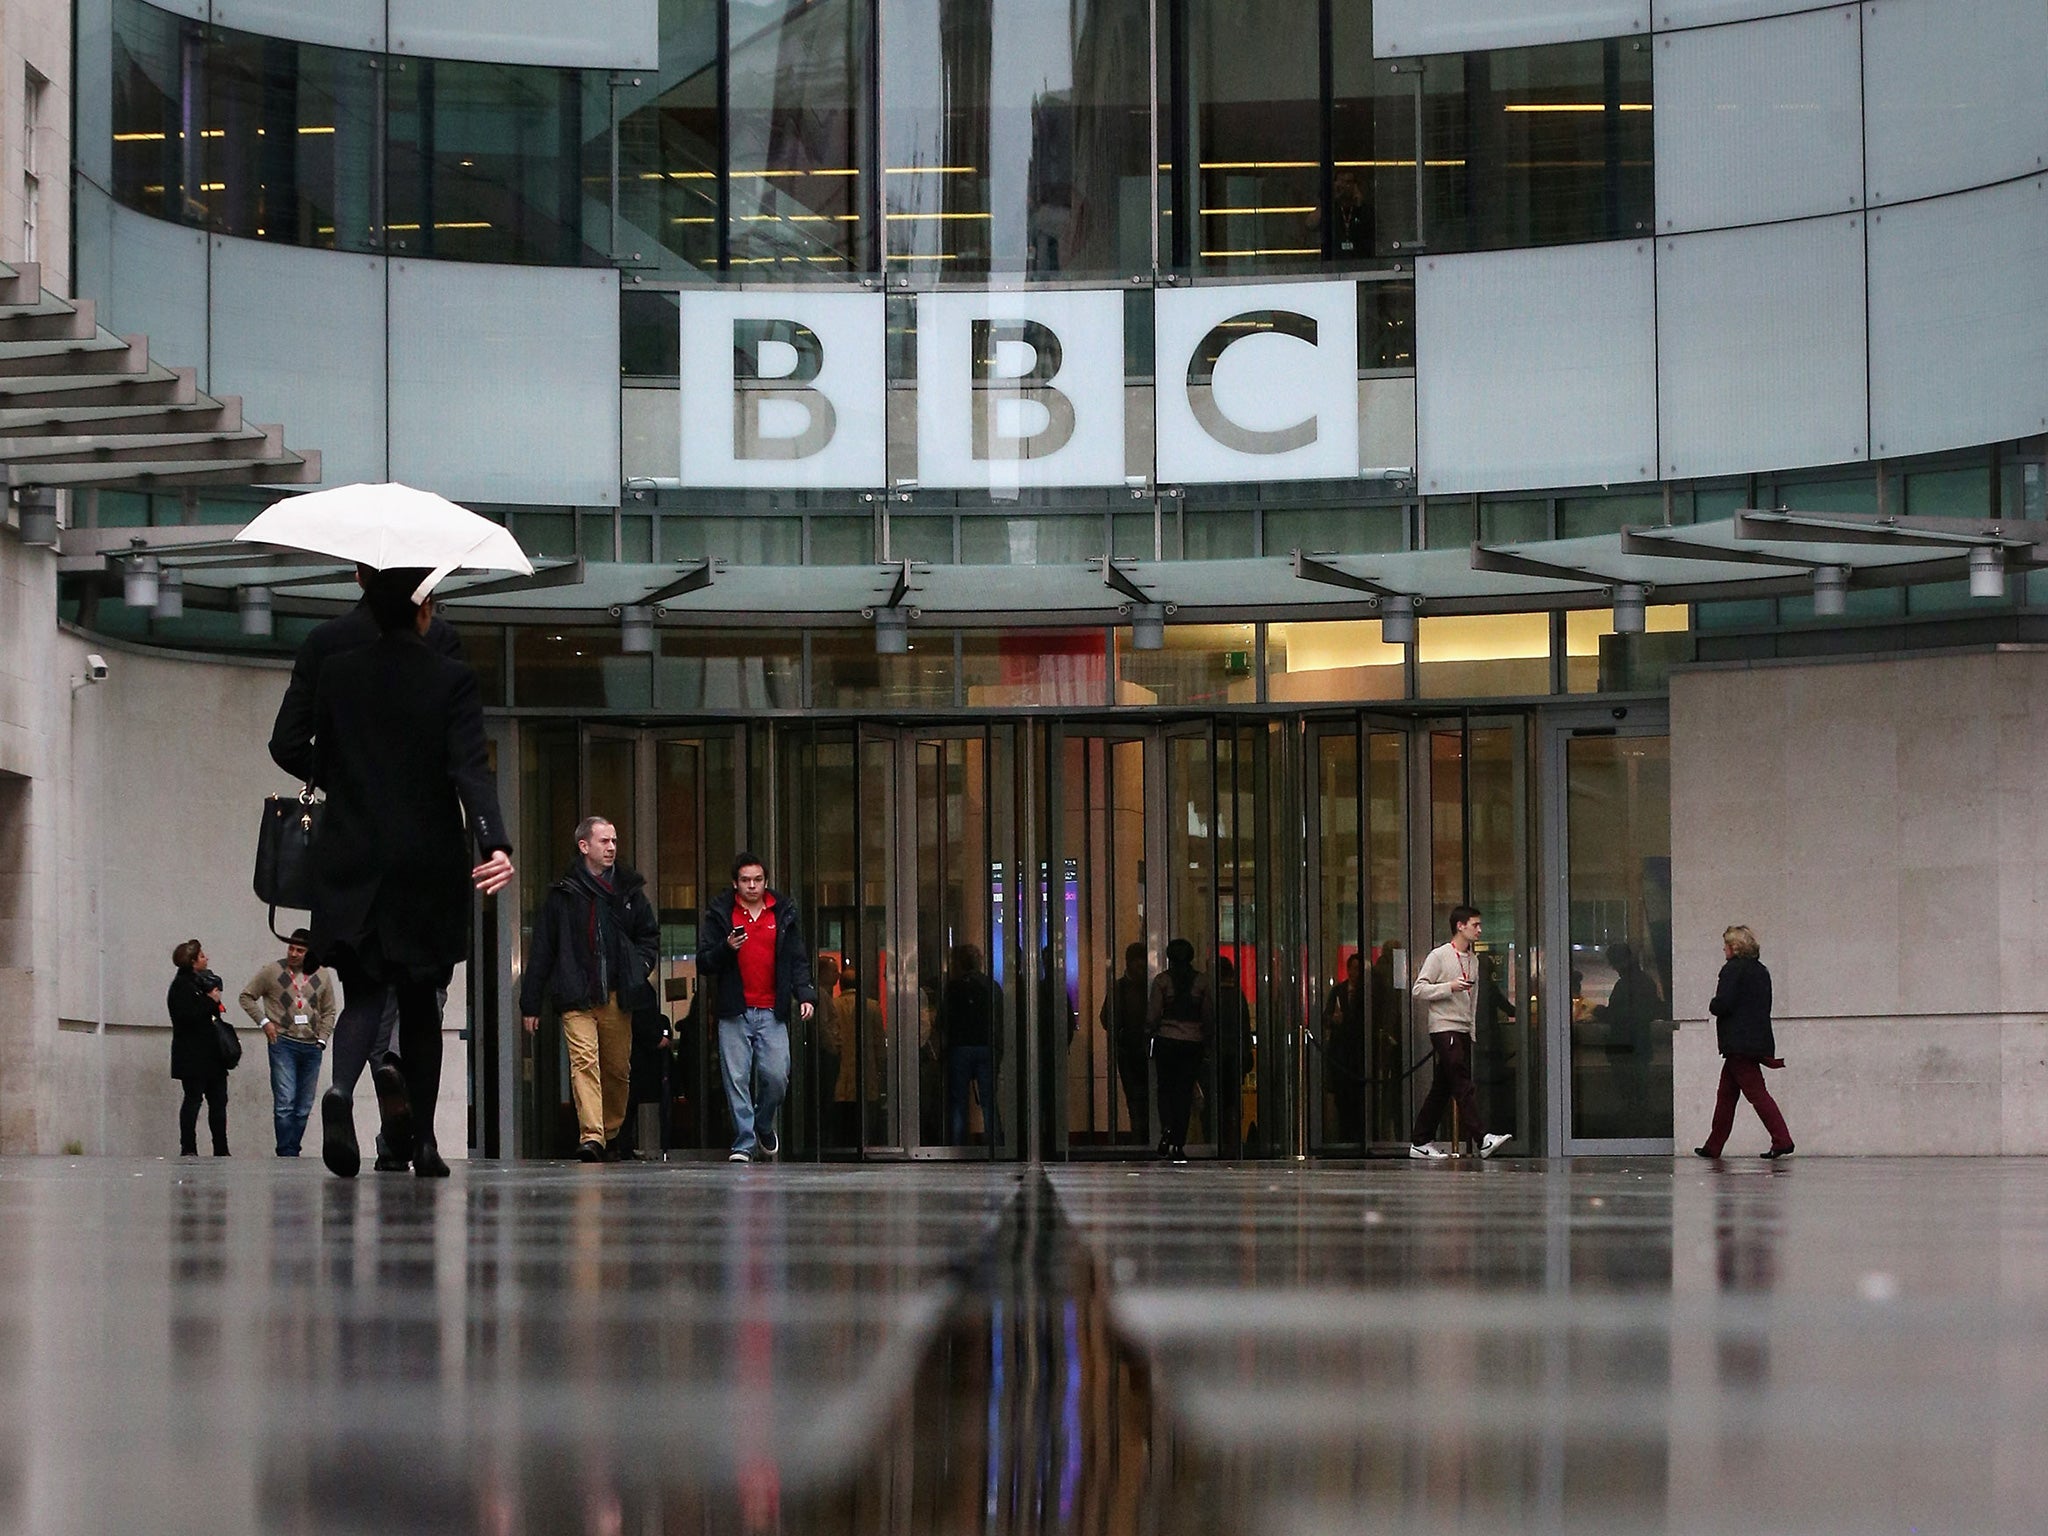 The BBC's Annual Report did show that an efficiencies programme has produced savings of £484m since 2012